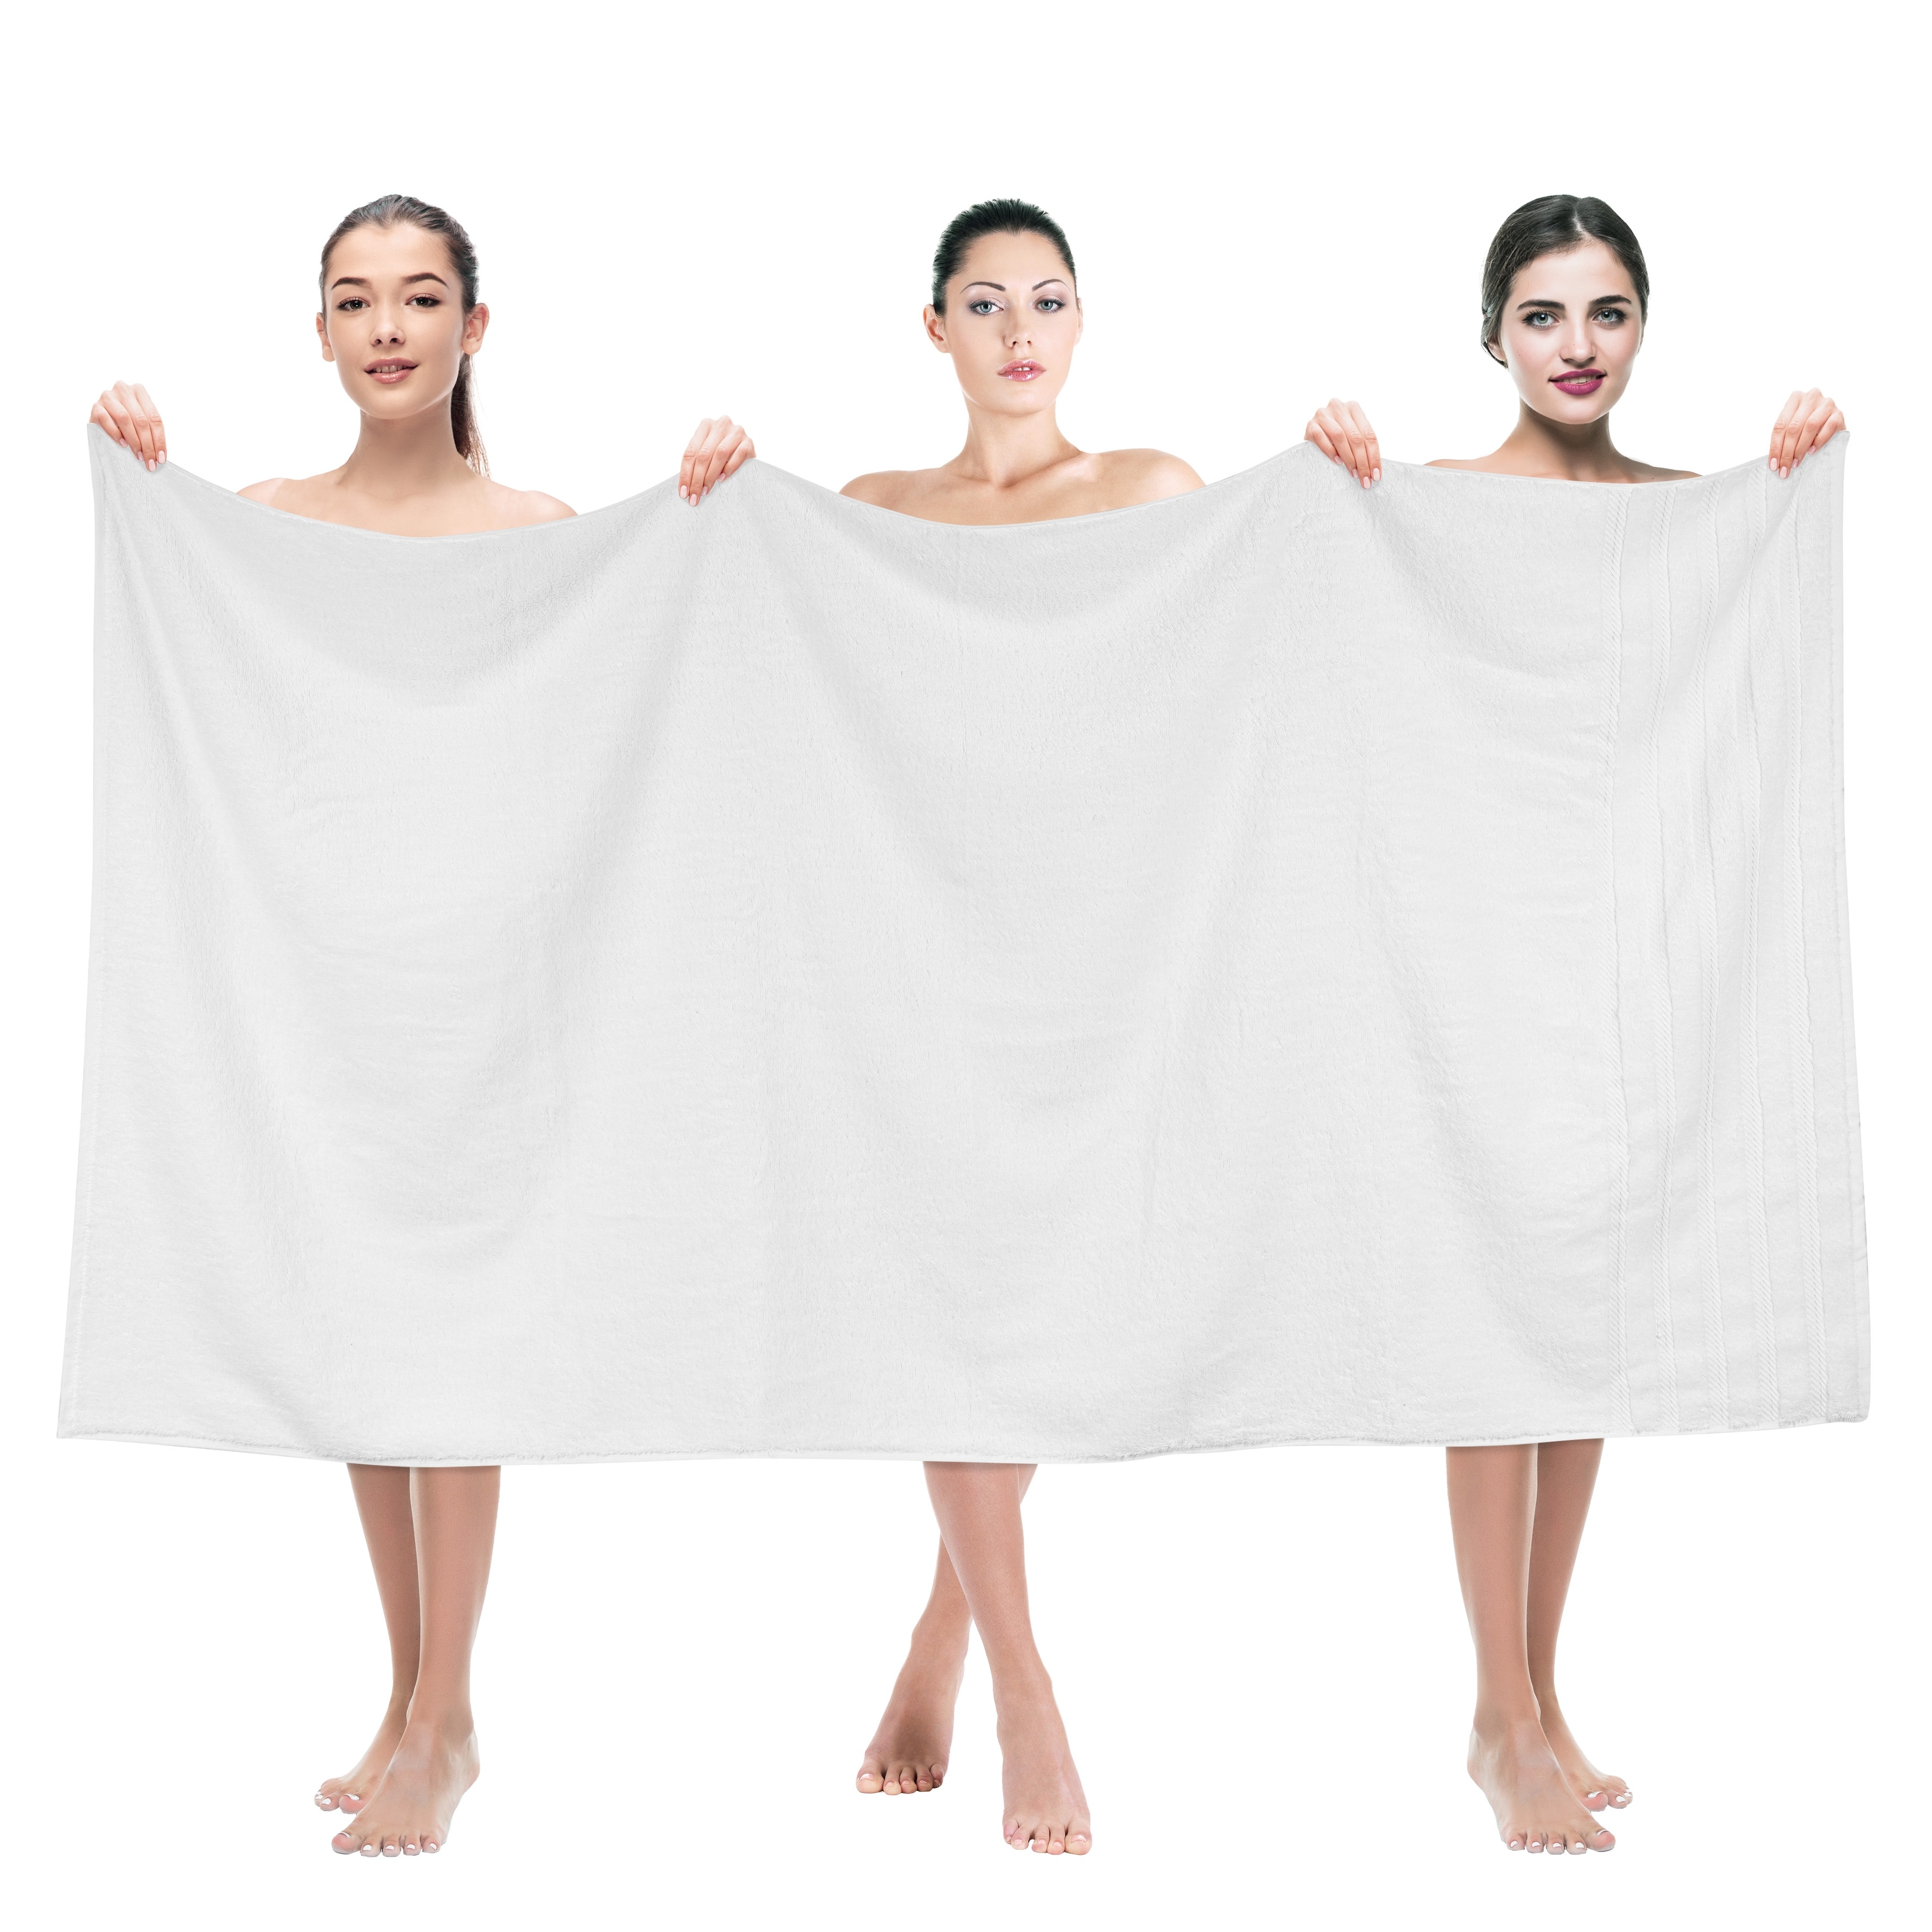 White Classic Luxury Bath Sheet Towels Extra Large 35x70 Inch | 2 Pack,  Silver